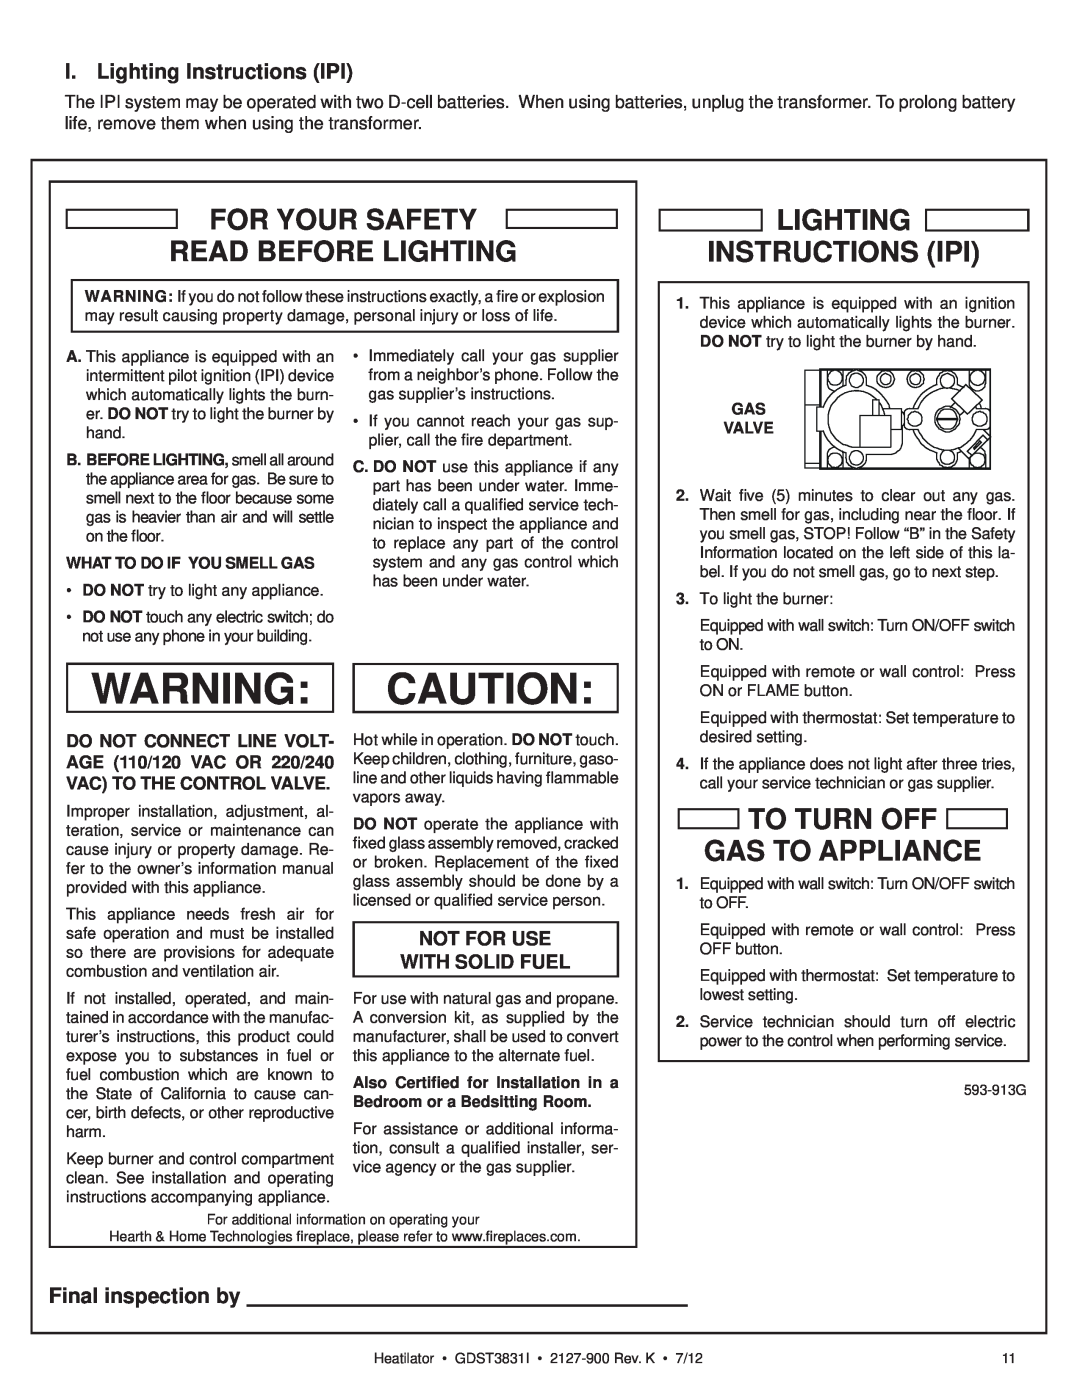 Heatiator GDST3831I For Your Safety Read Before Lighting, Lighting Instructions Ipi, To Turn Off Gas To Appliance 